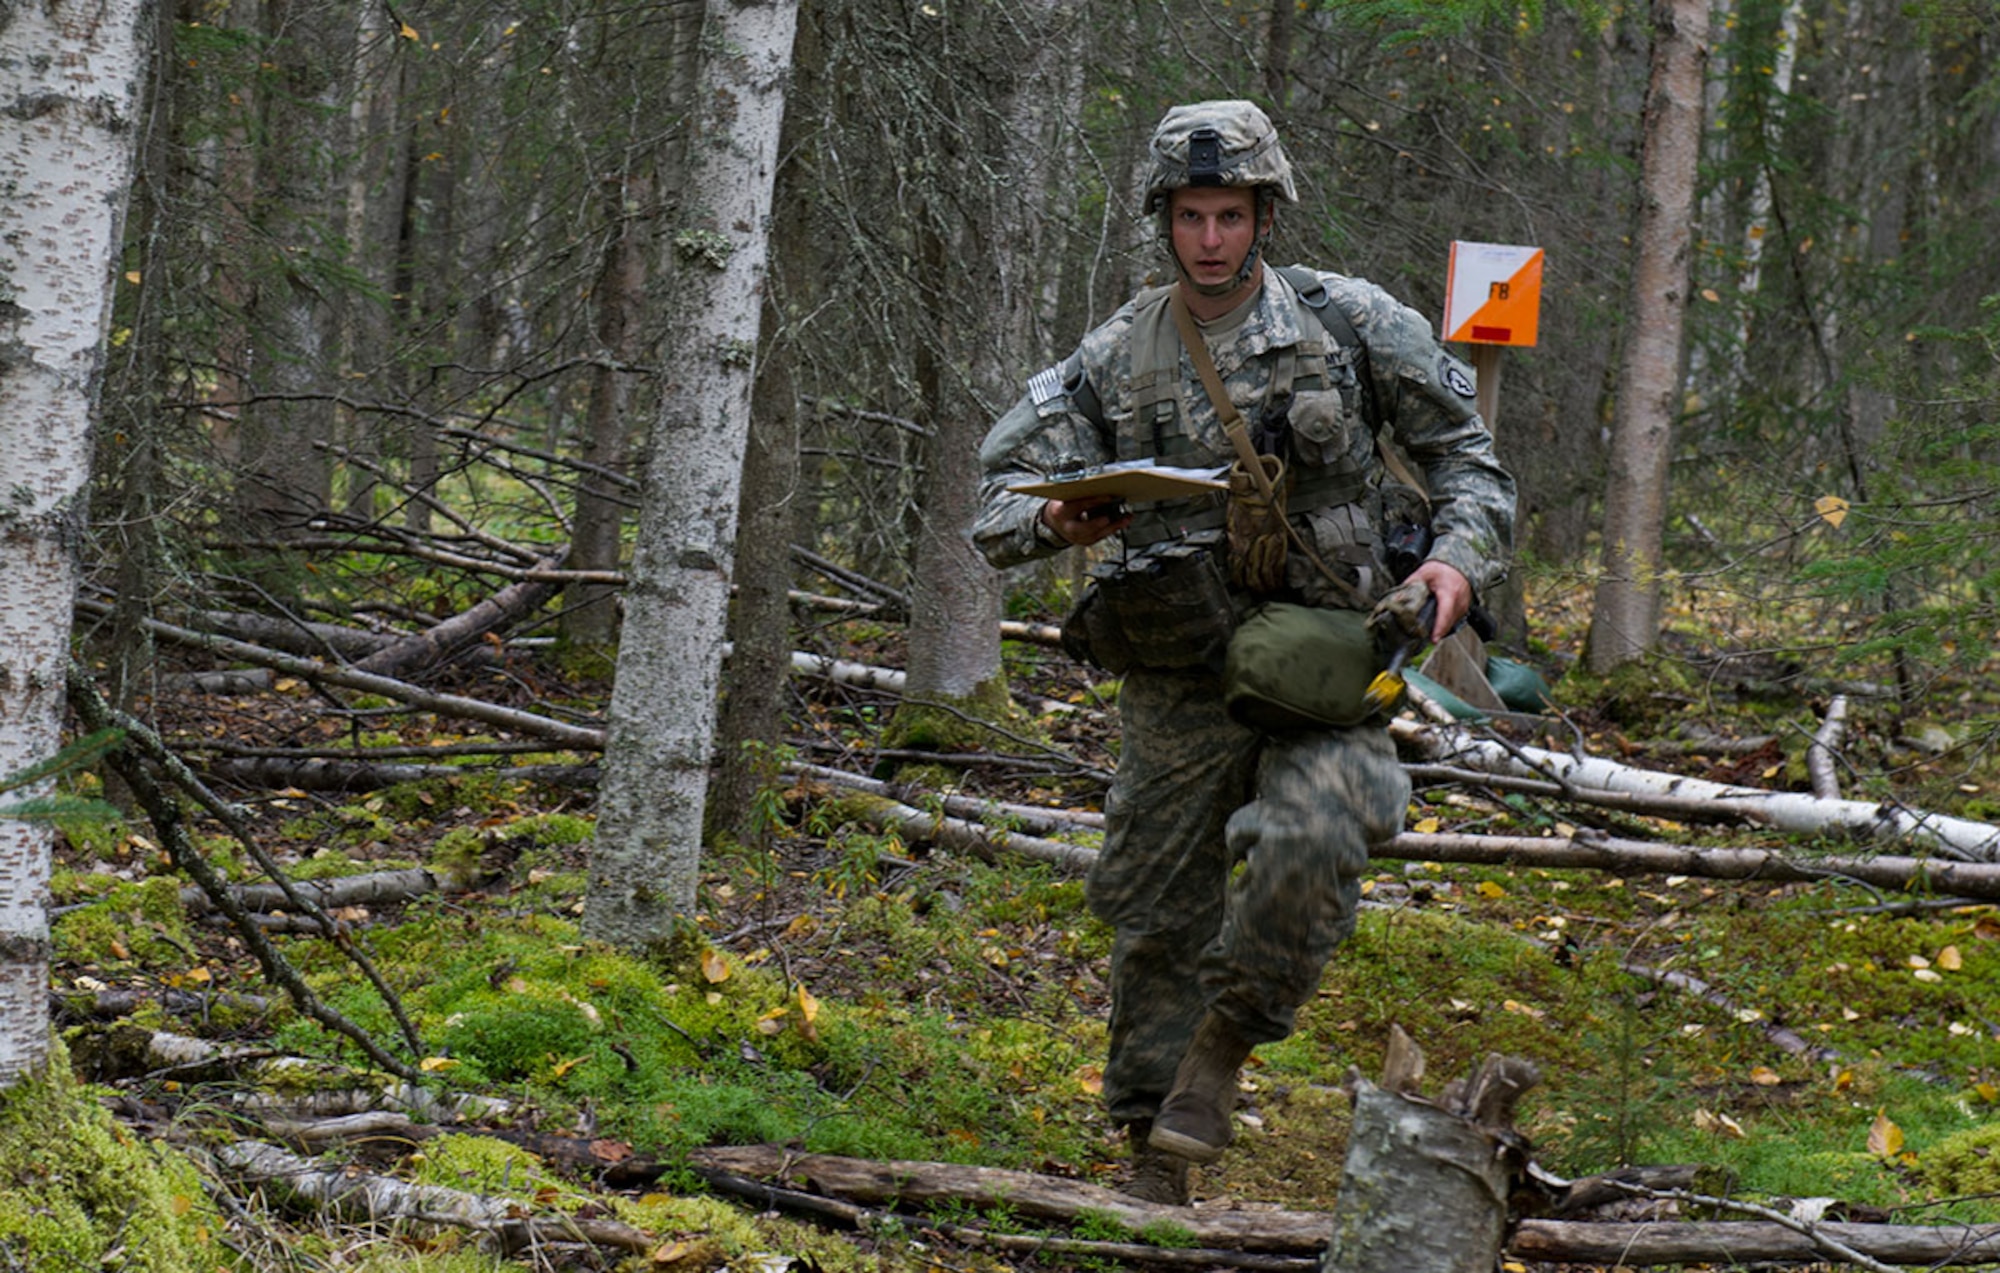 Spc. Mattew Ward, a native of Westminster, Md., assigned to Dog Company, 3rd Battalion (Airborne), 509th Infantry Regiment, 4th Infantry Brigade Combat Team (Airborne), 25th Infantry Division, U.S. Army Alaska, runs to his next point on the land navigation course during Expert Infantryman Badge qualification on Joint Base Elmendorf-Richardson, Tuesday, Sept. 9, 2014. The Expert Infantryman Badge was approved by the Secretary of War on October 7, 1943, and is currently awarded to U.S. Army personnel who hold infantry or special forces military occupational specialties and successfully pass the rigors of the course. (U.S. Air Force photo/Justin Connaher)